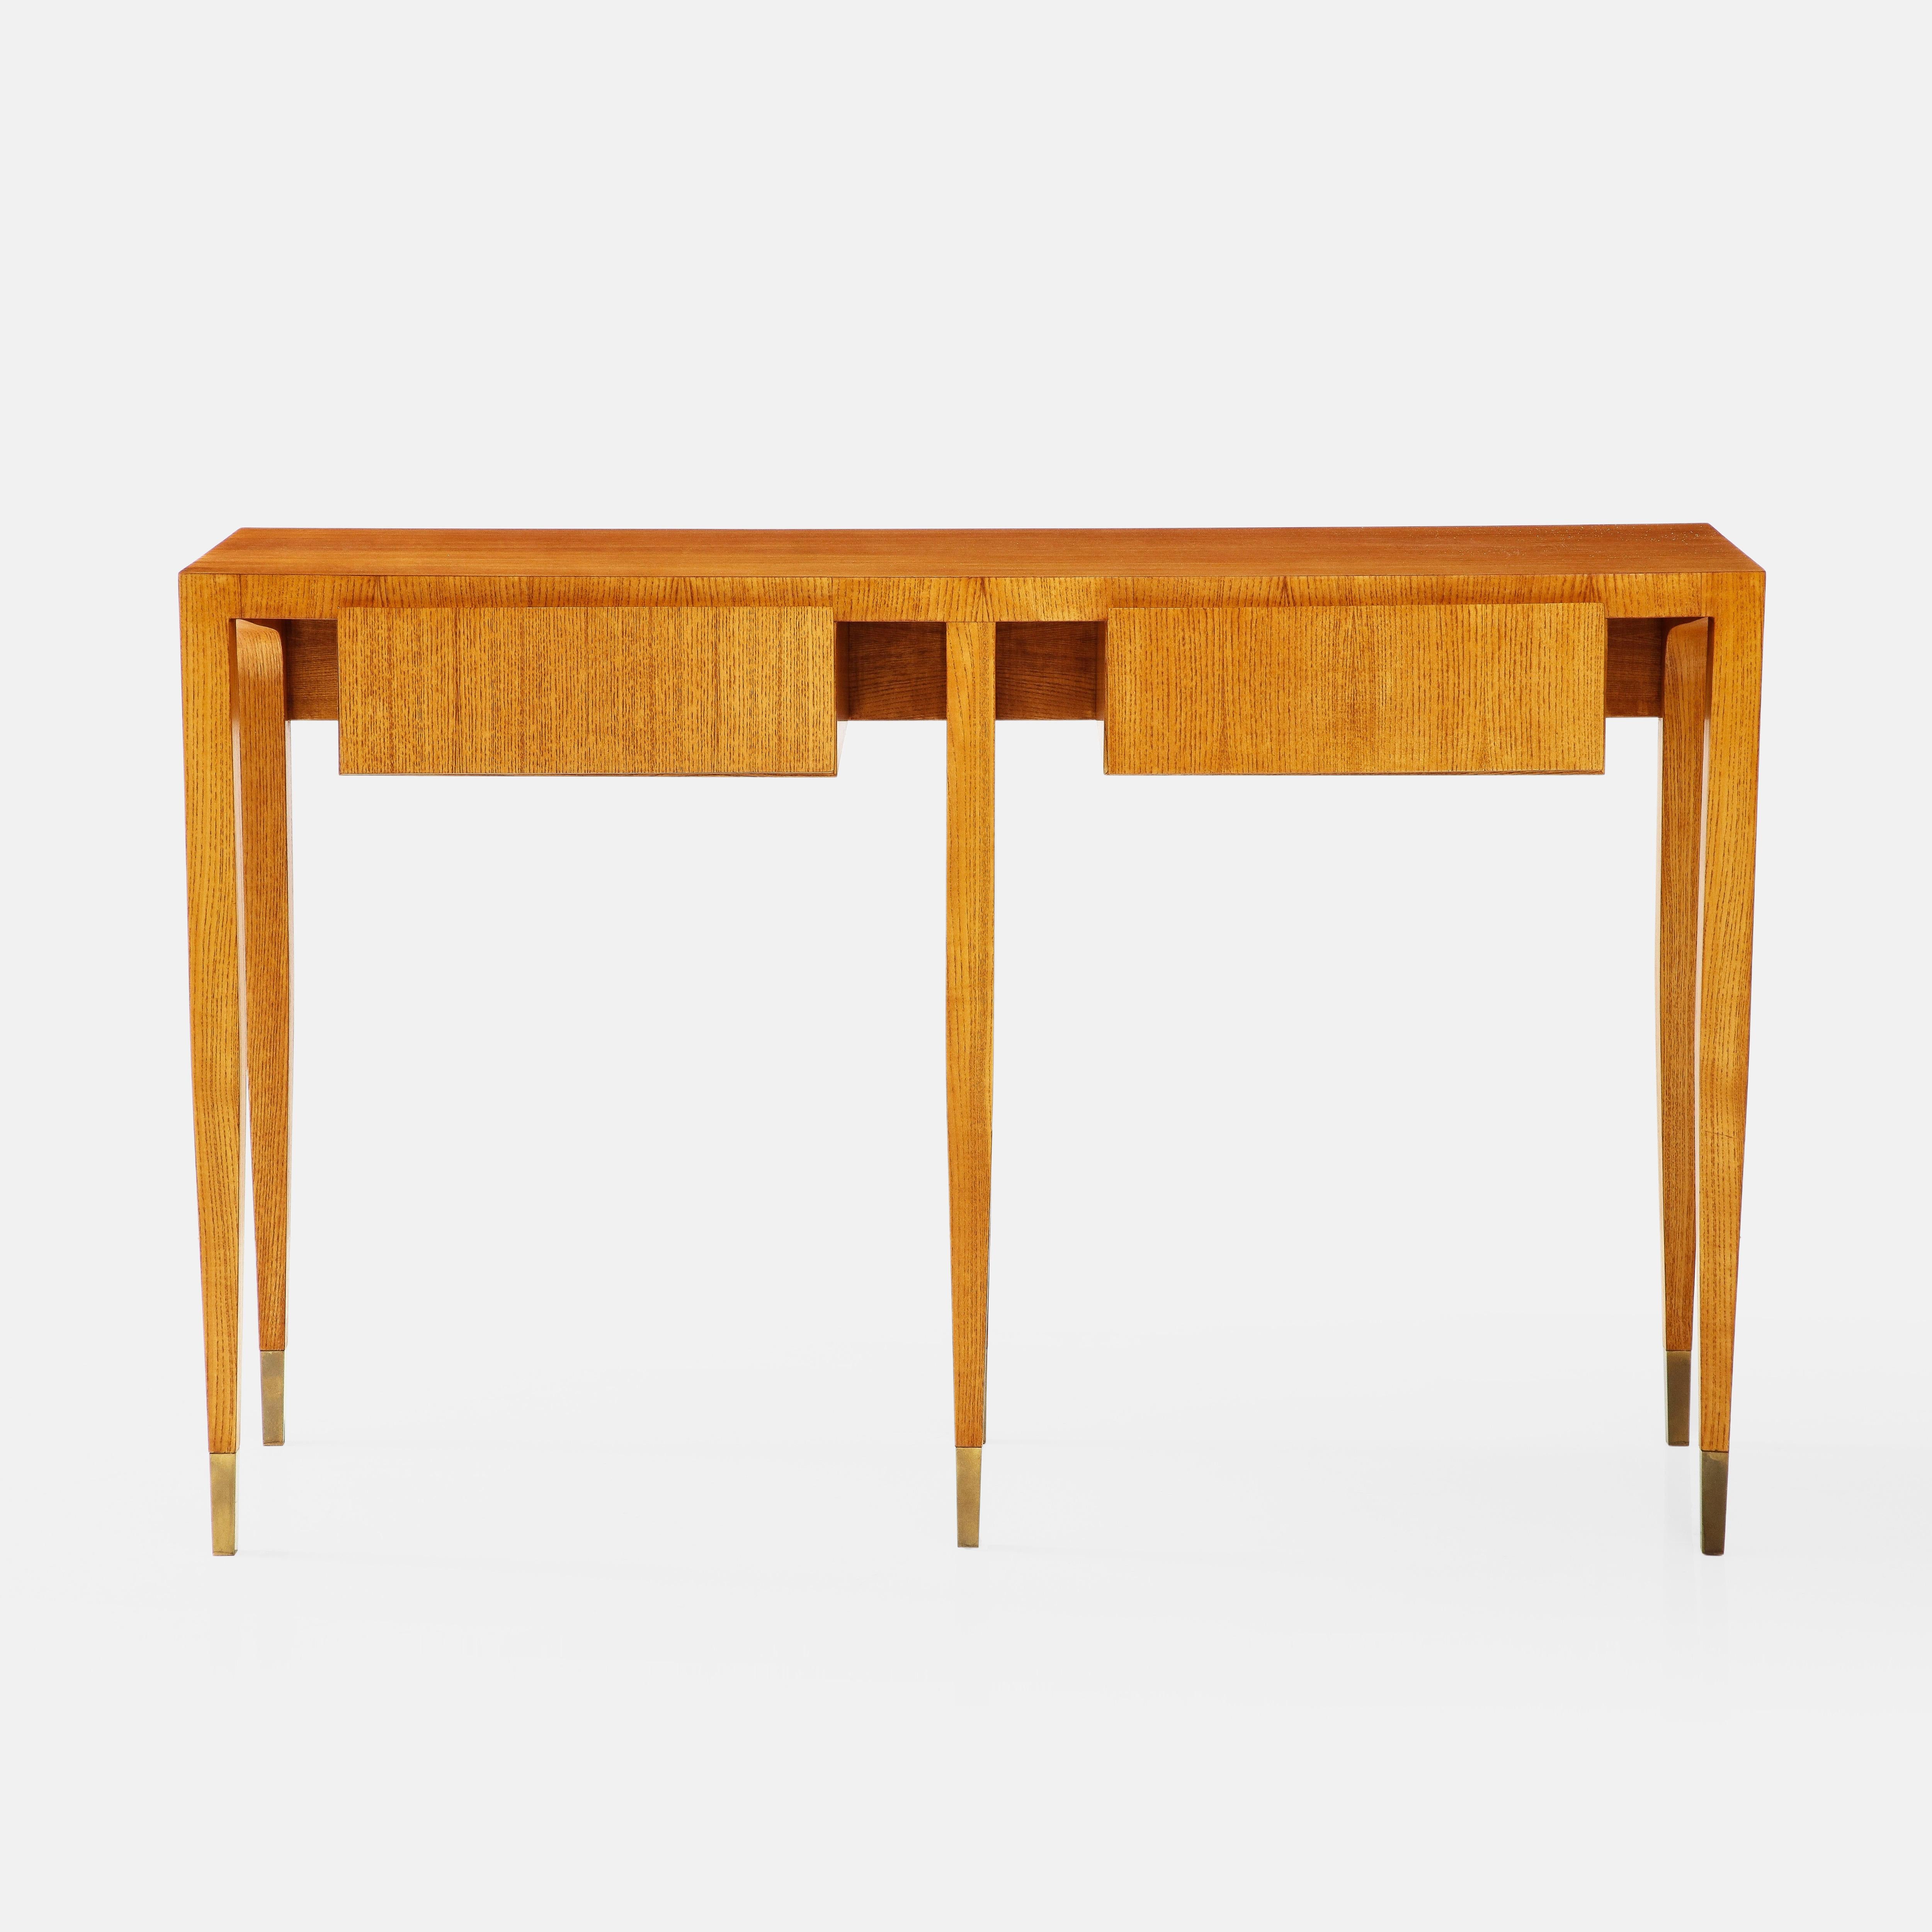 Gio Ponti for Giordano Chiesa Rare Pair of Ash Wood Consoles, Italy, 1950s For Sale 7